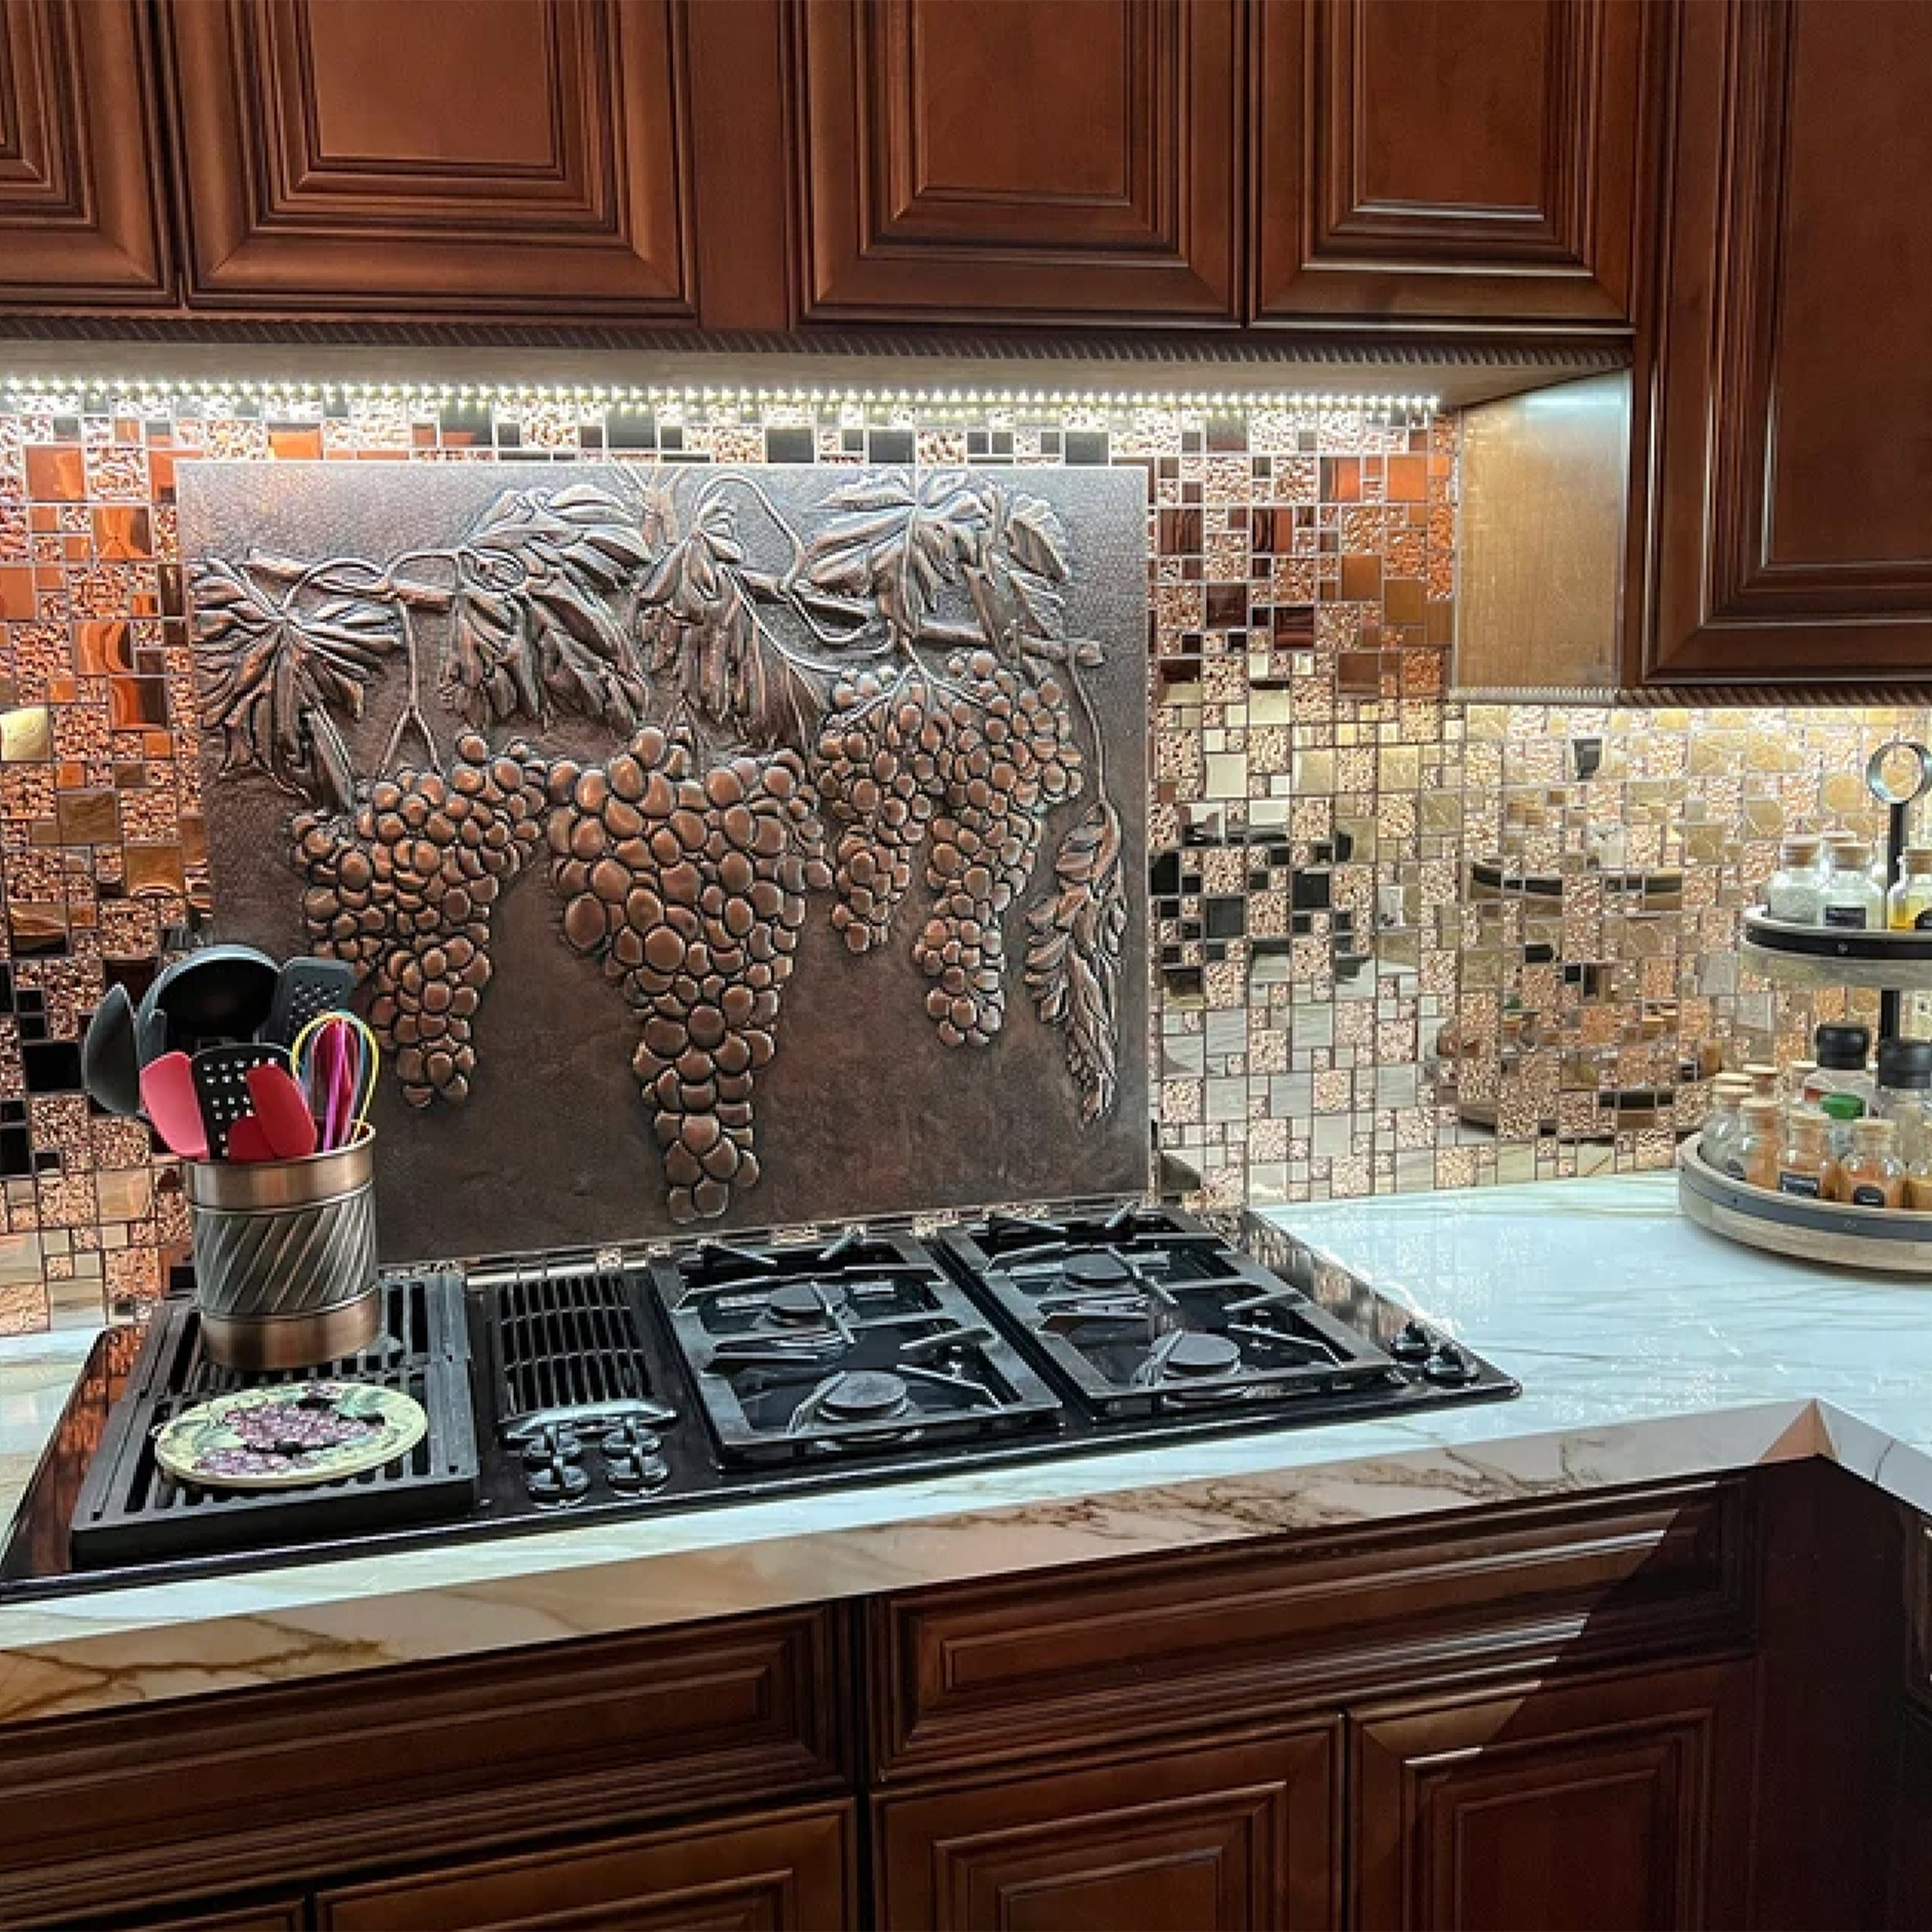 How to Tile a Backsplash with Vintage Tiles - MY 100 YEAR OLD HOME